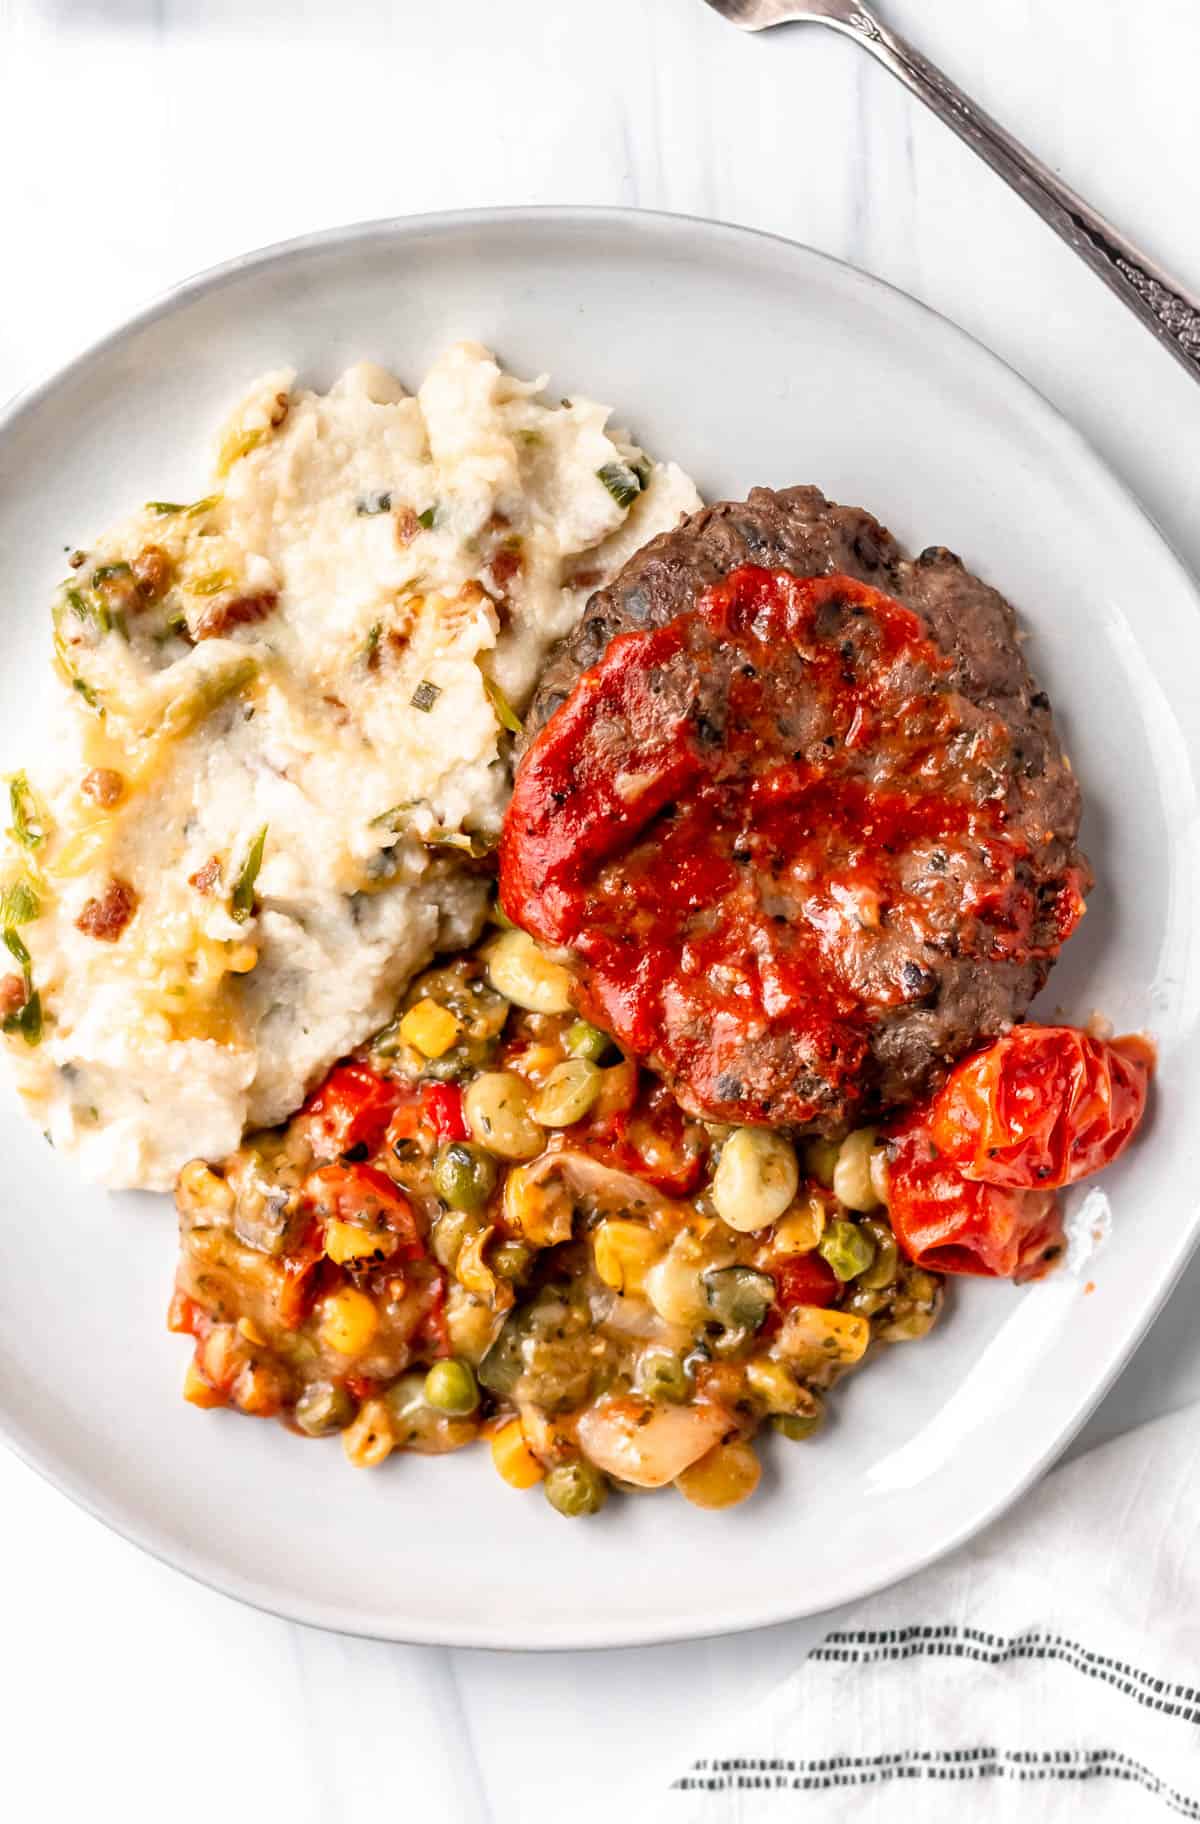 Freshly bunless bison burger, mashed potatoes and succotash on a white plate.